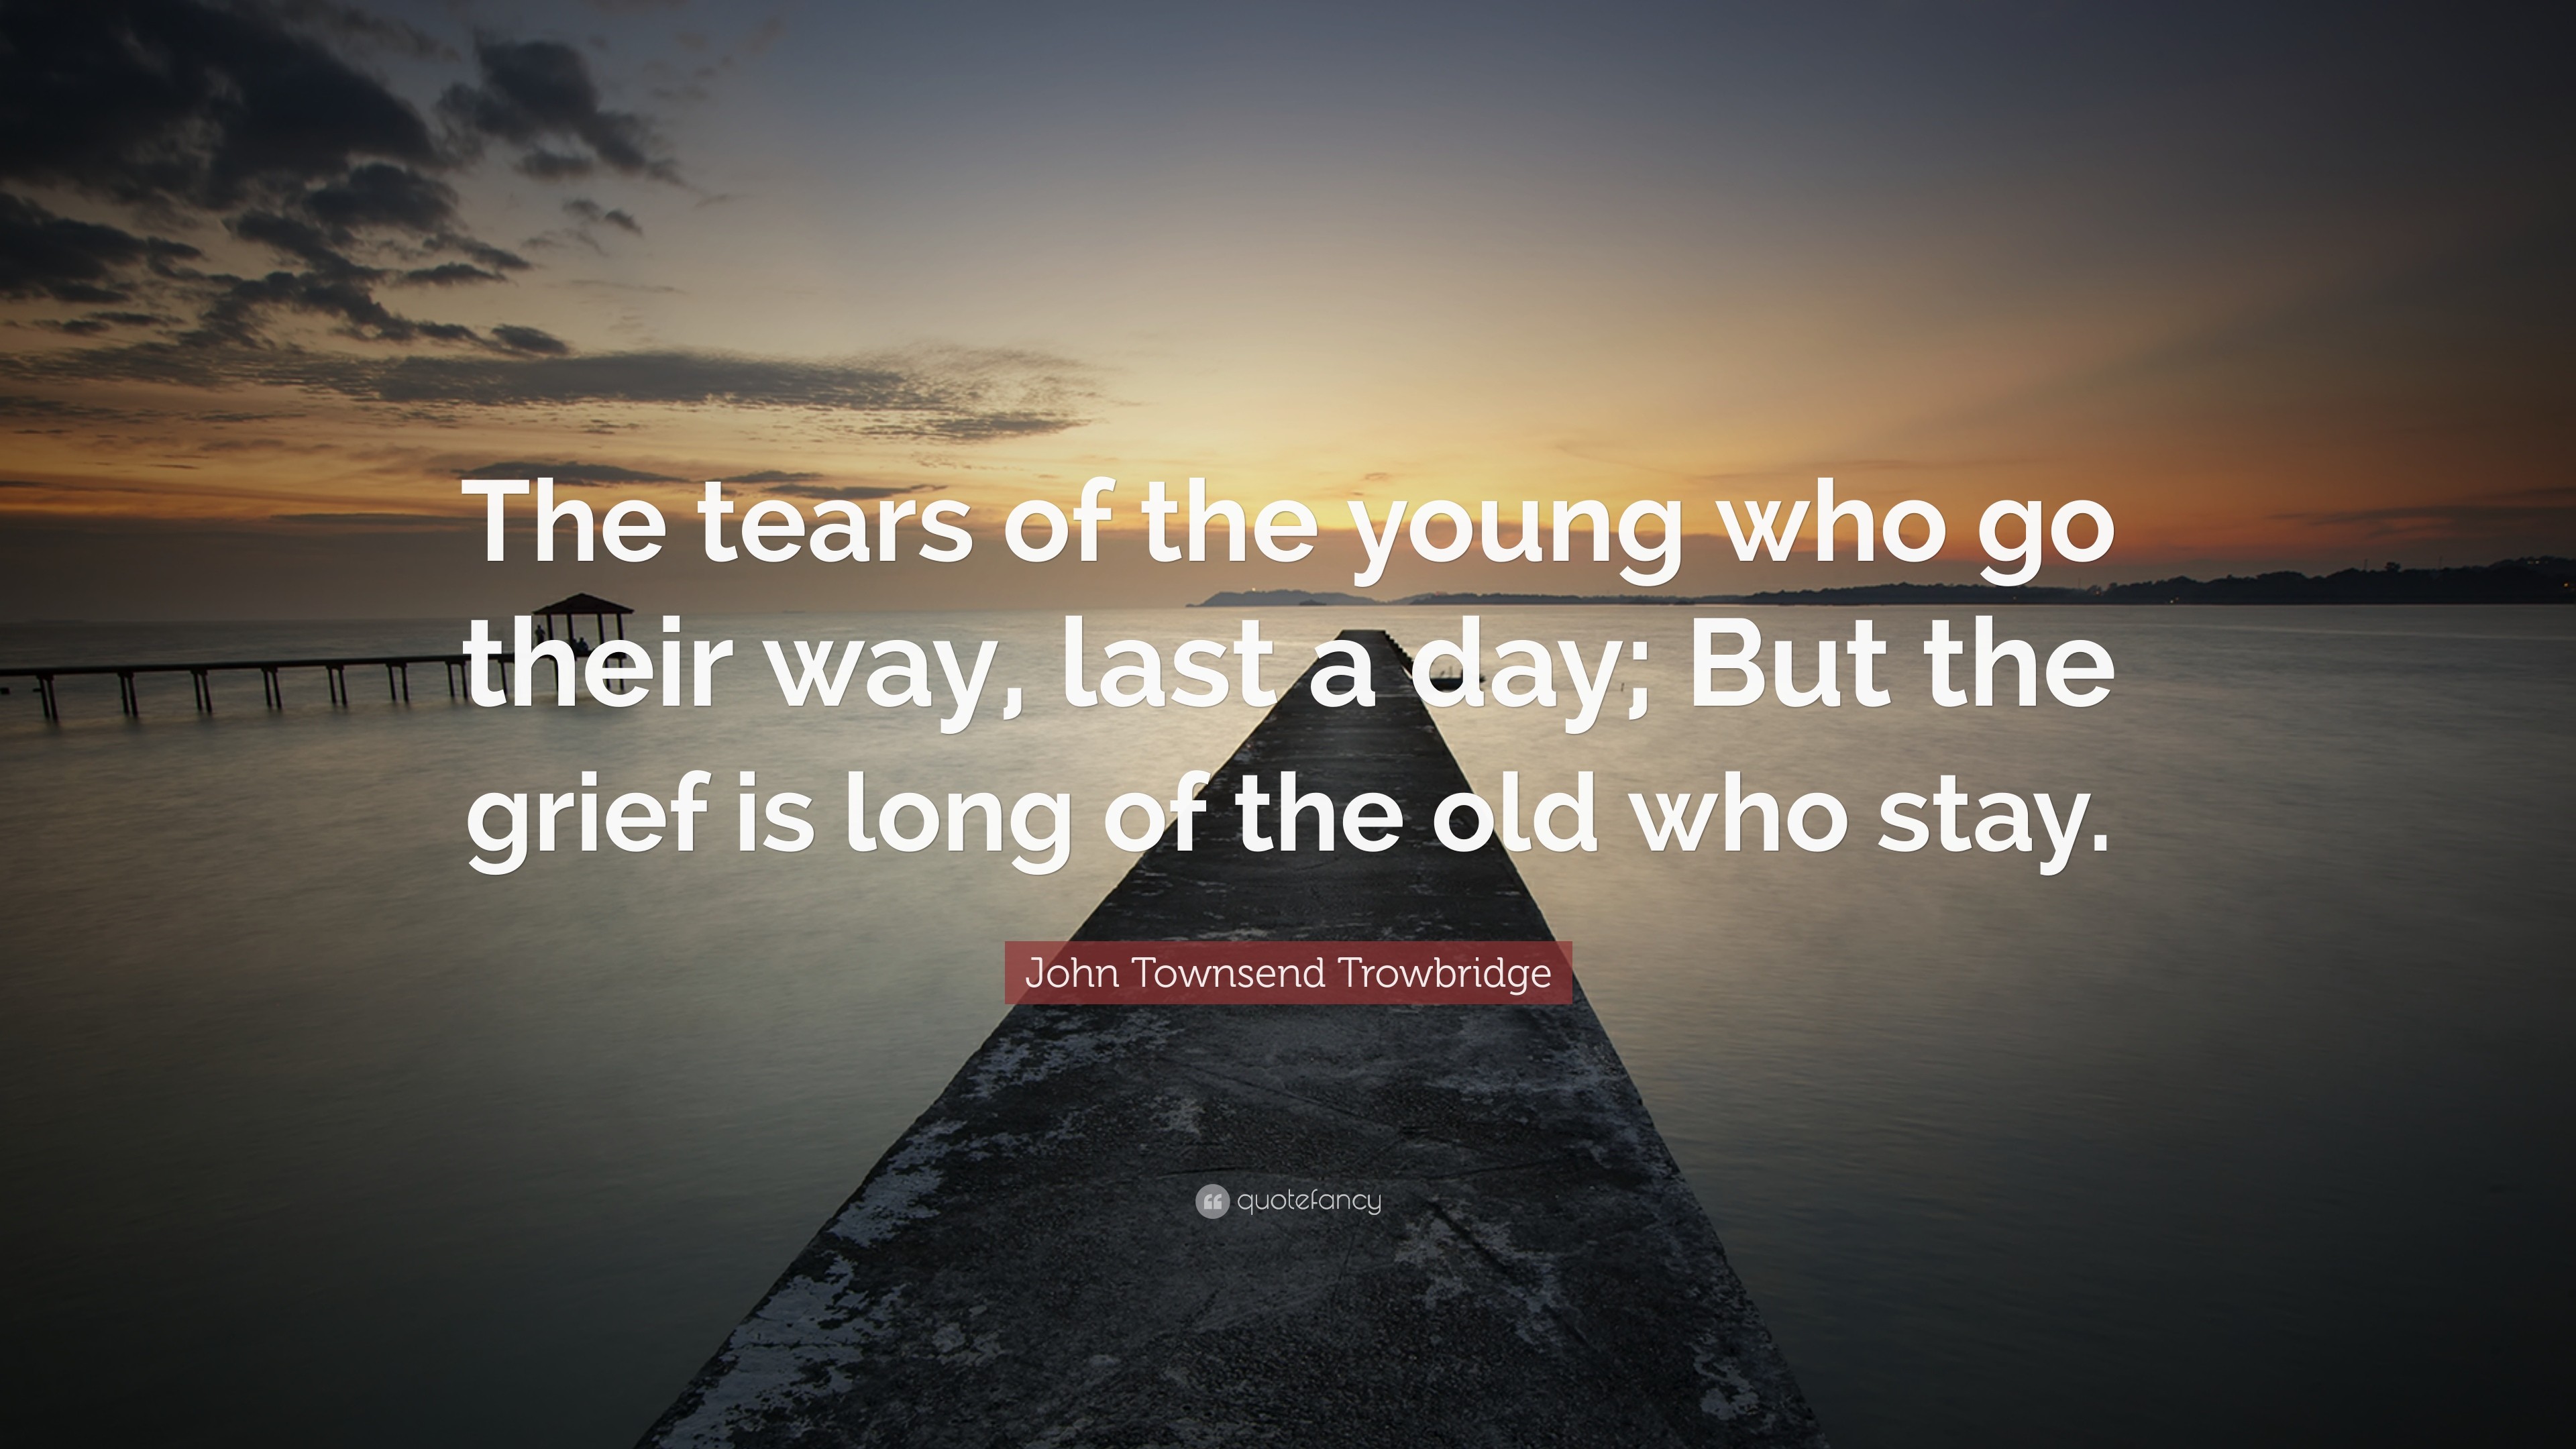 3840x2160 John Townsend Trowbridge Quote: “The tears of the young who go their way,